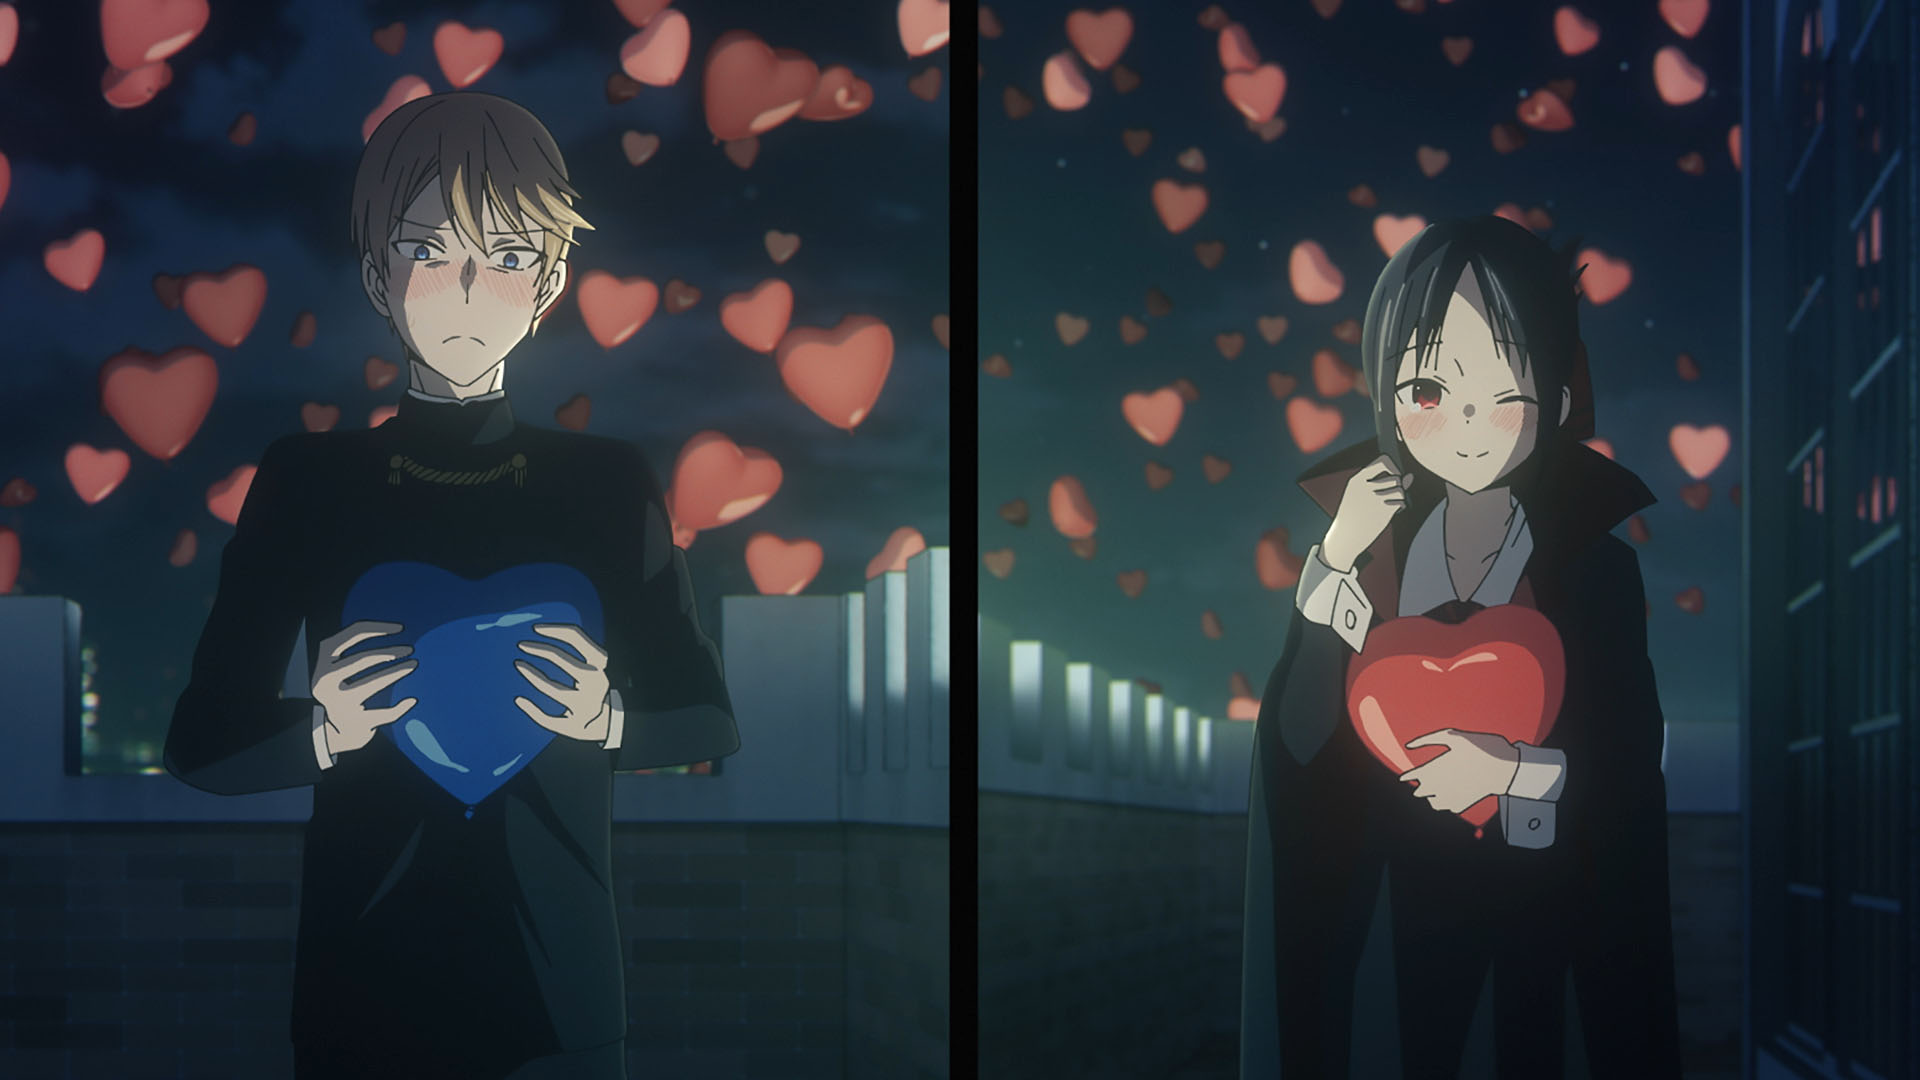 Crunchyroll - Kaguya-sama: Love is War -The First Kiss That Never Ends-  Heads to U.S. Theaters in February 2023